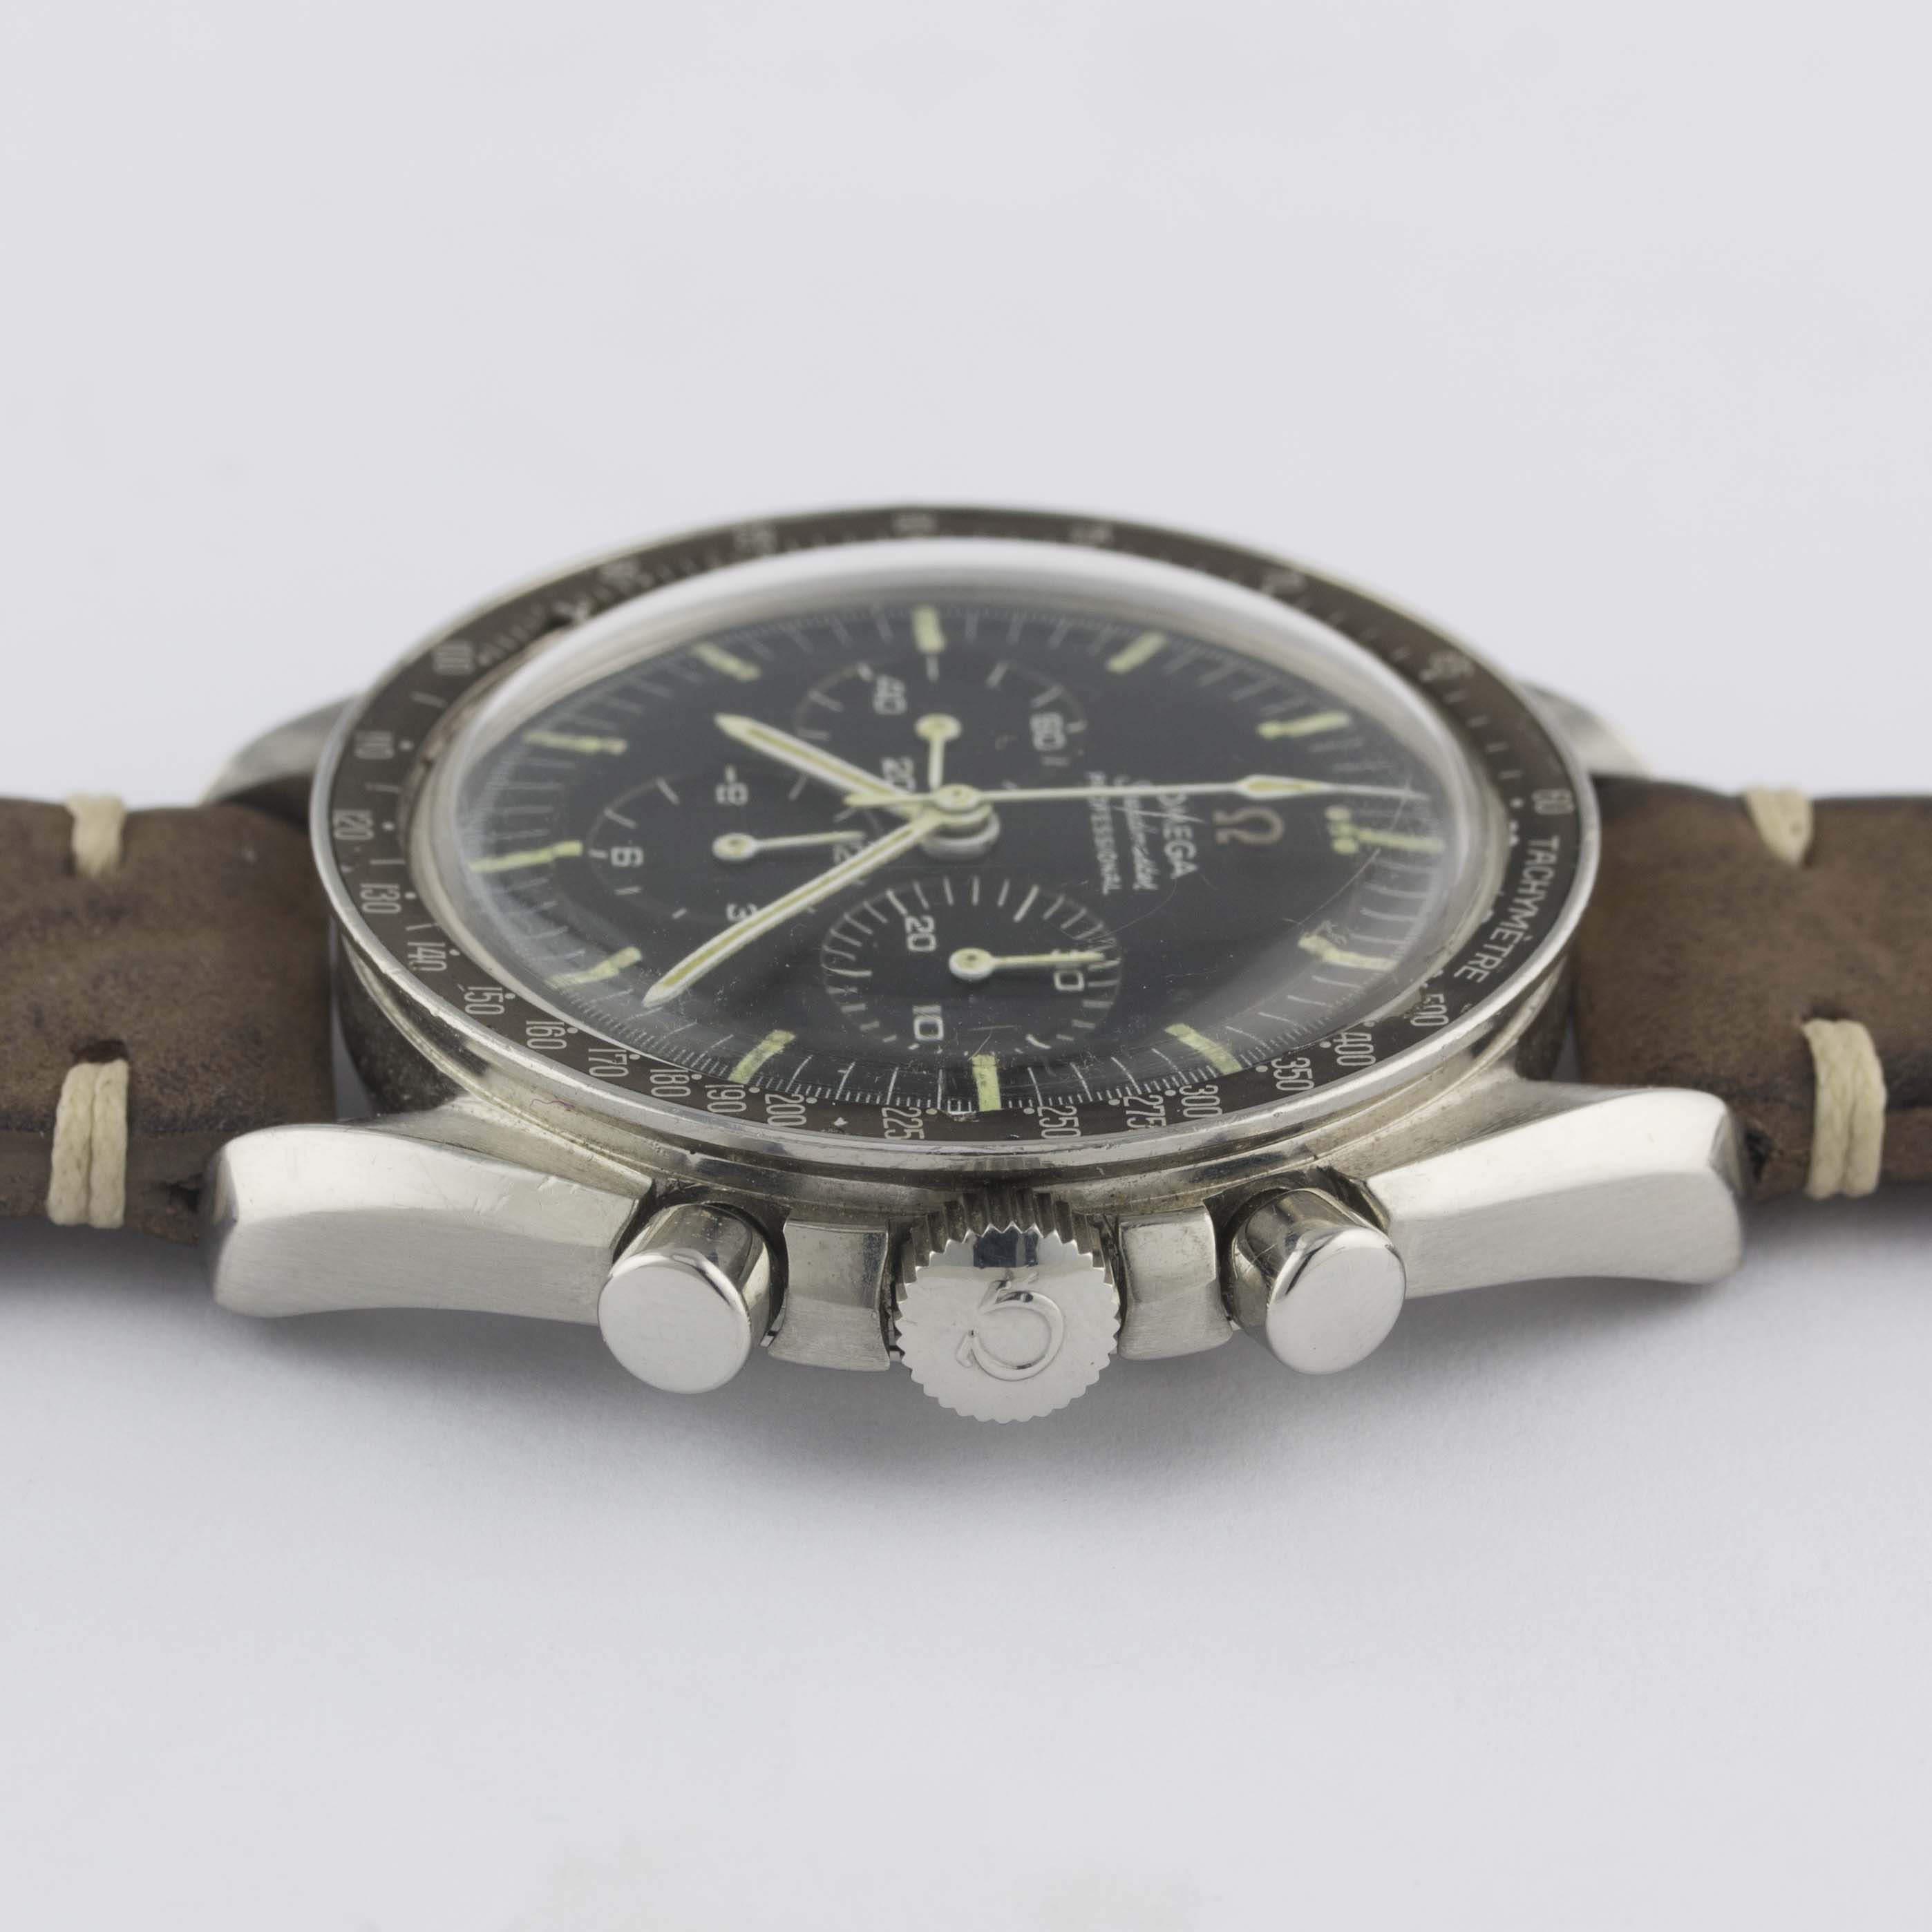 A RARE GENTLEMAN'S STAINLESS STEEL OMEGA SPEEDMASTER PROFESSIONAL "PRE MOON" CHRONOGRAPH WRIST WATCH - Image 10 of 11